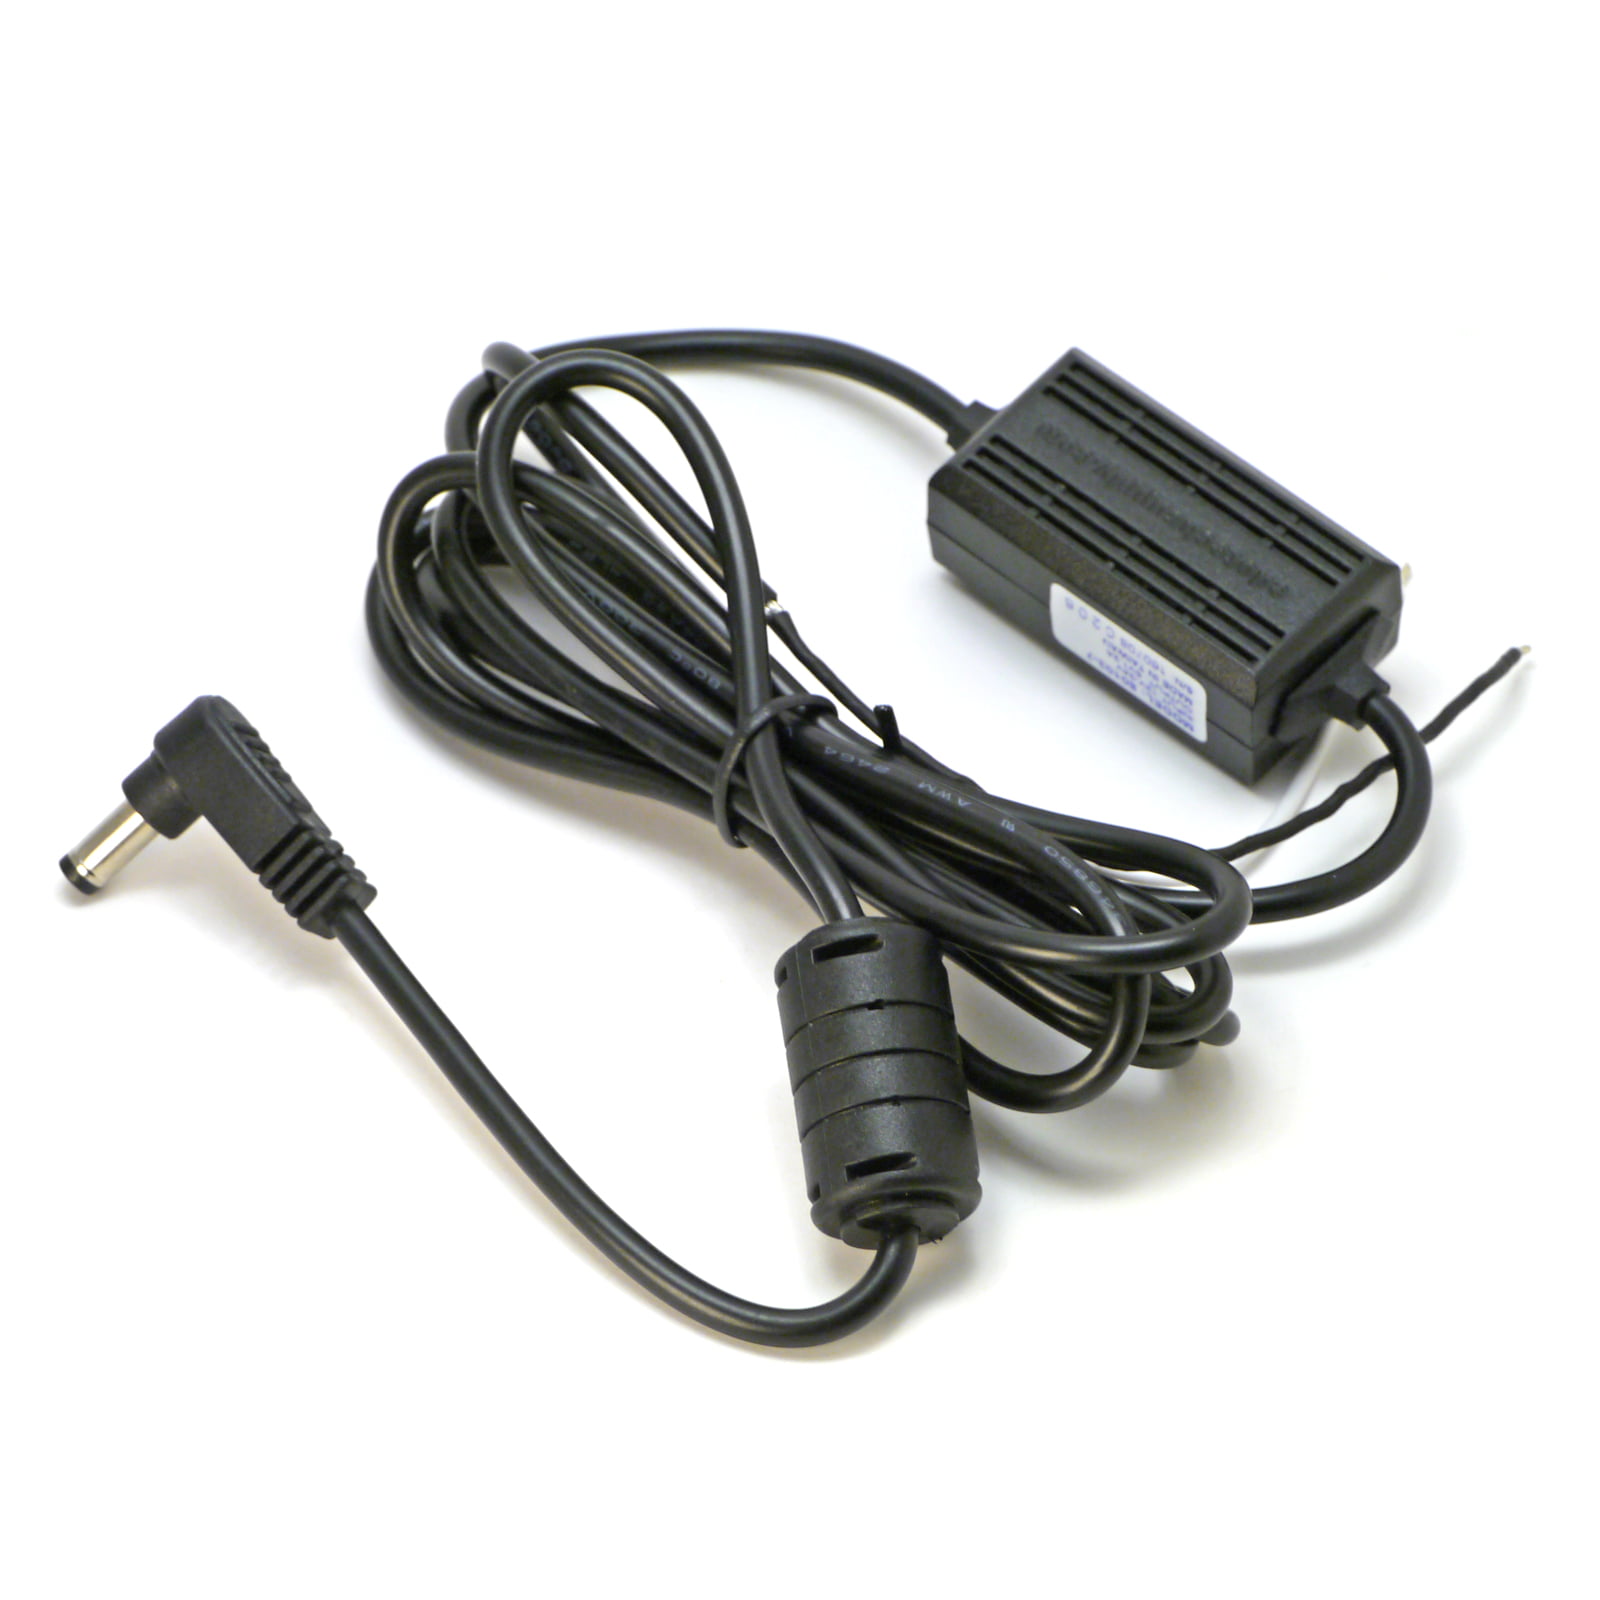 Need home power cord for Sirius XM powerconnect vehicle dock 5v 3' long ac adapt 